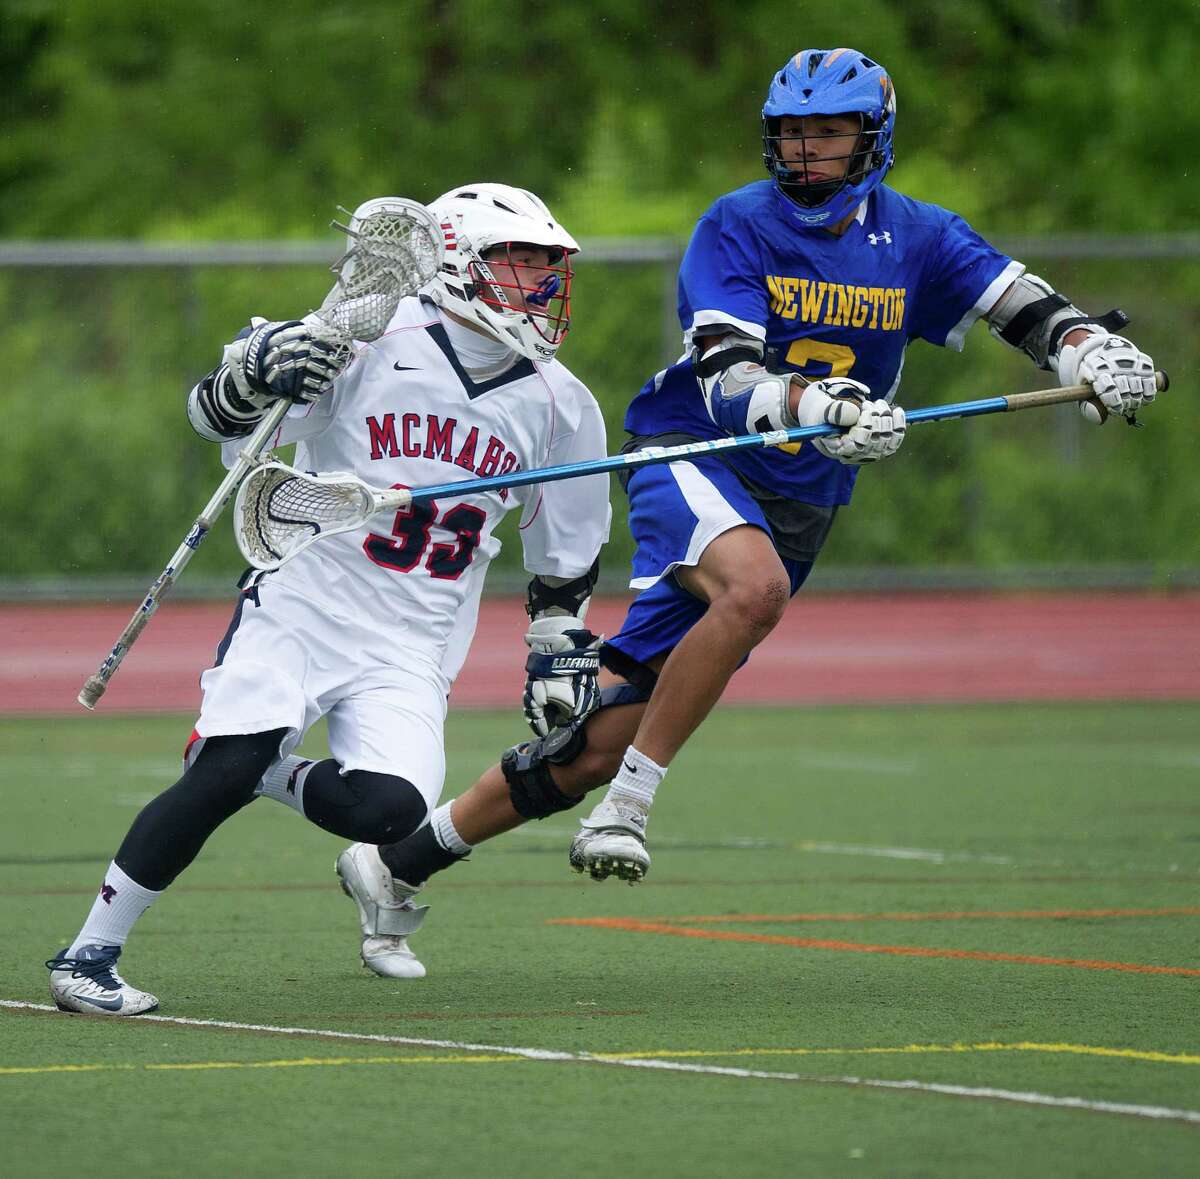 Brien McMahon's Andrew D'Antonio controls the ball as he is defended by Newington's John Massaro during Saturday's Boys Lacrosse State Tournament qualifying round class L in Norwalk, Conn., on May 25, 2013.